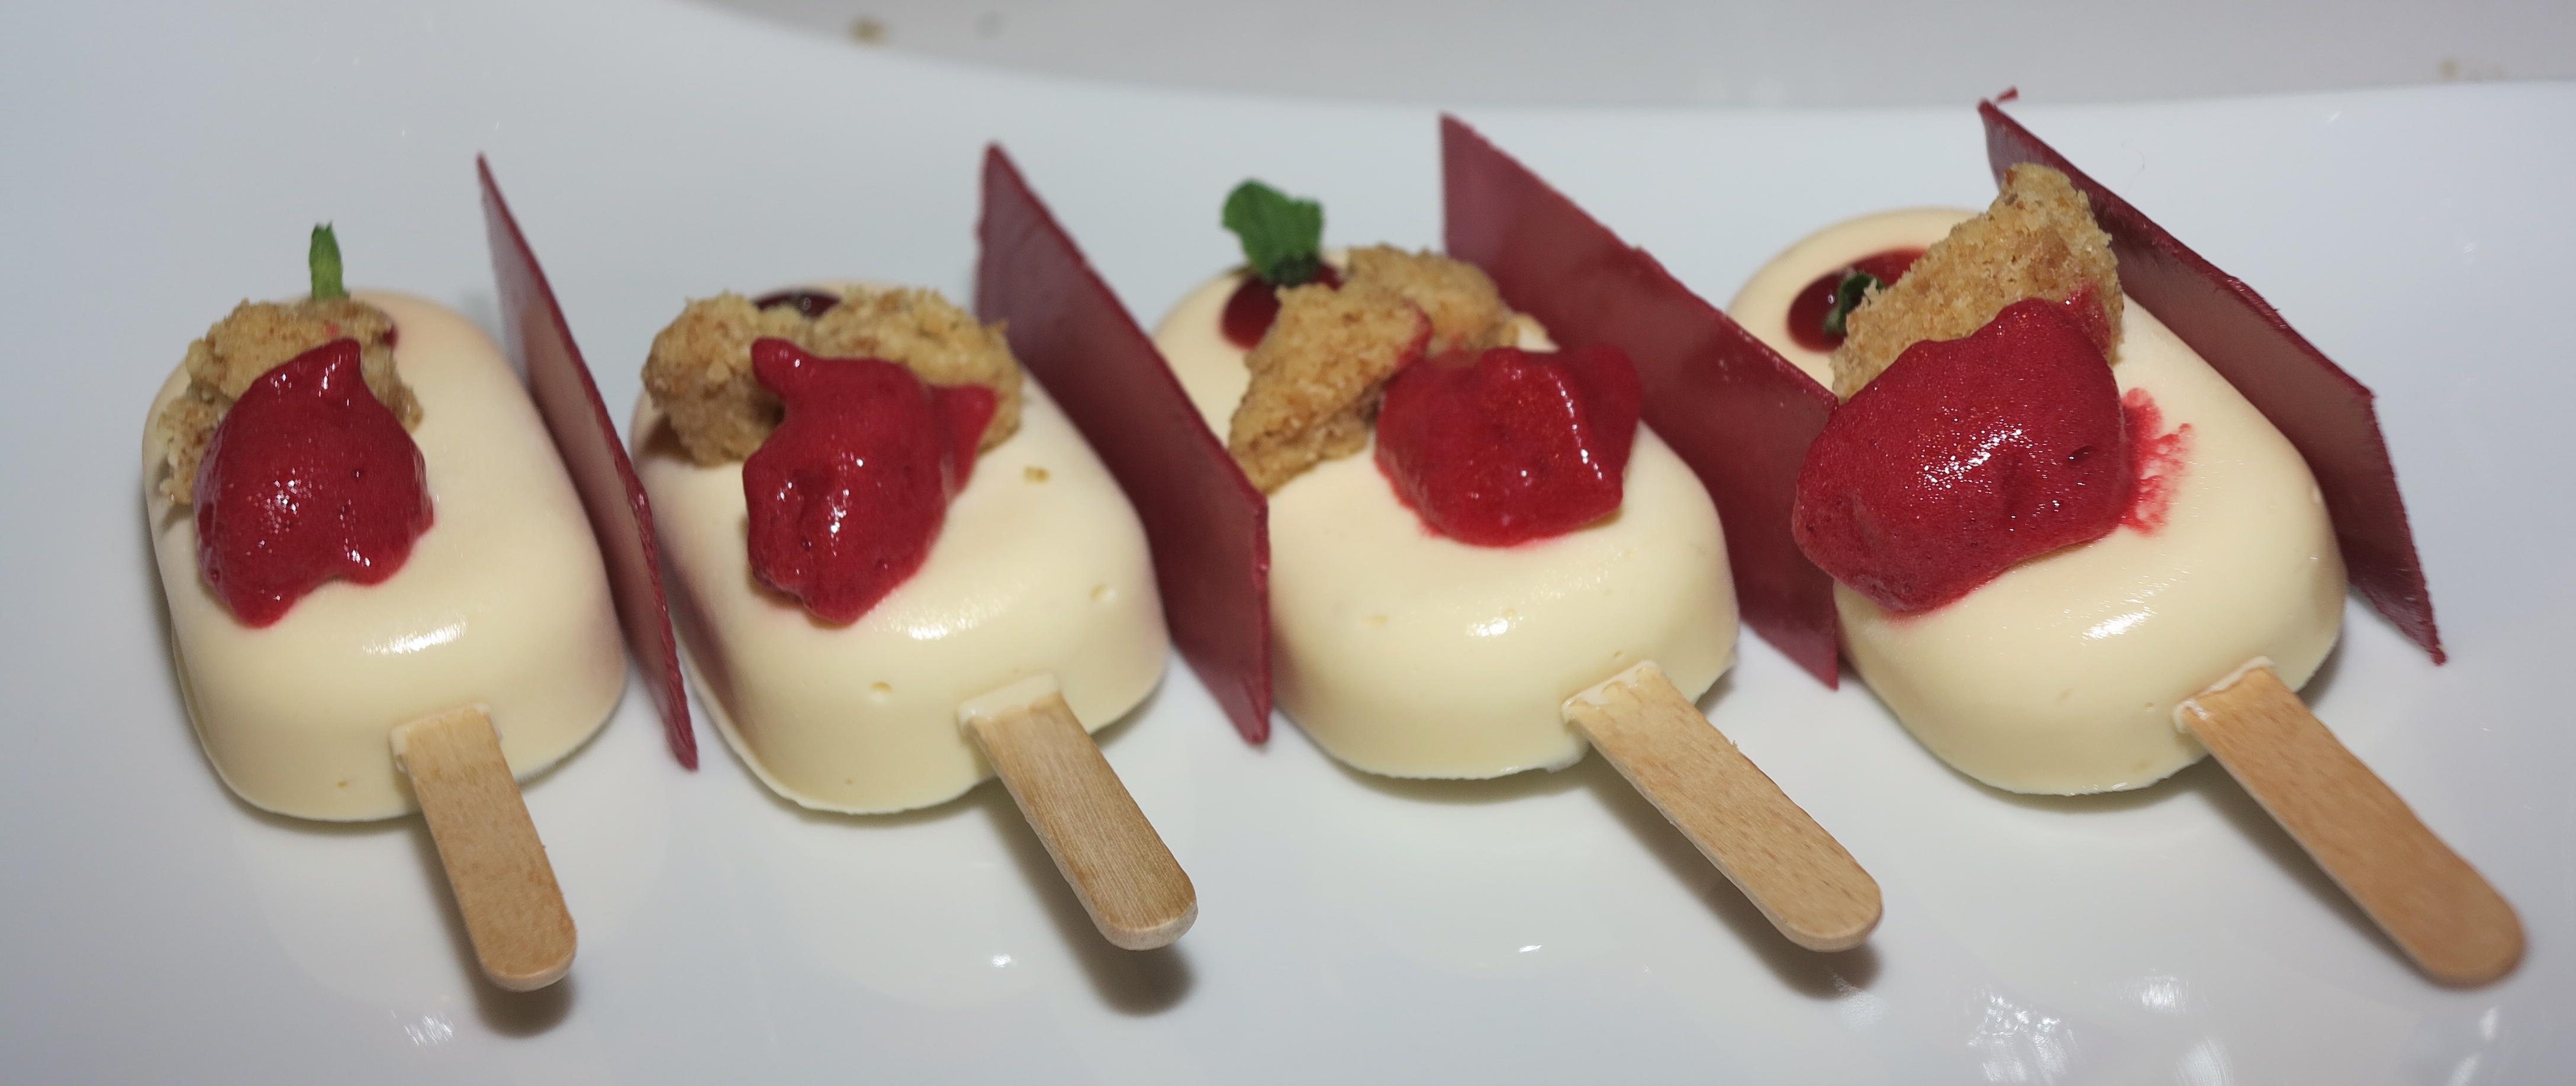 Jolly lollies: One of the delicious desserts